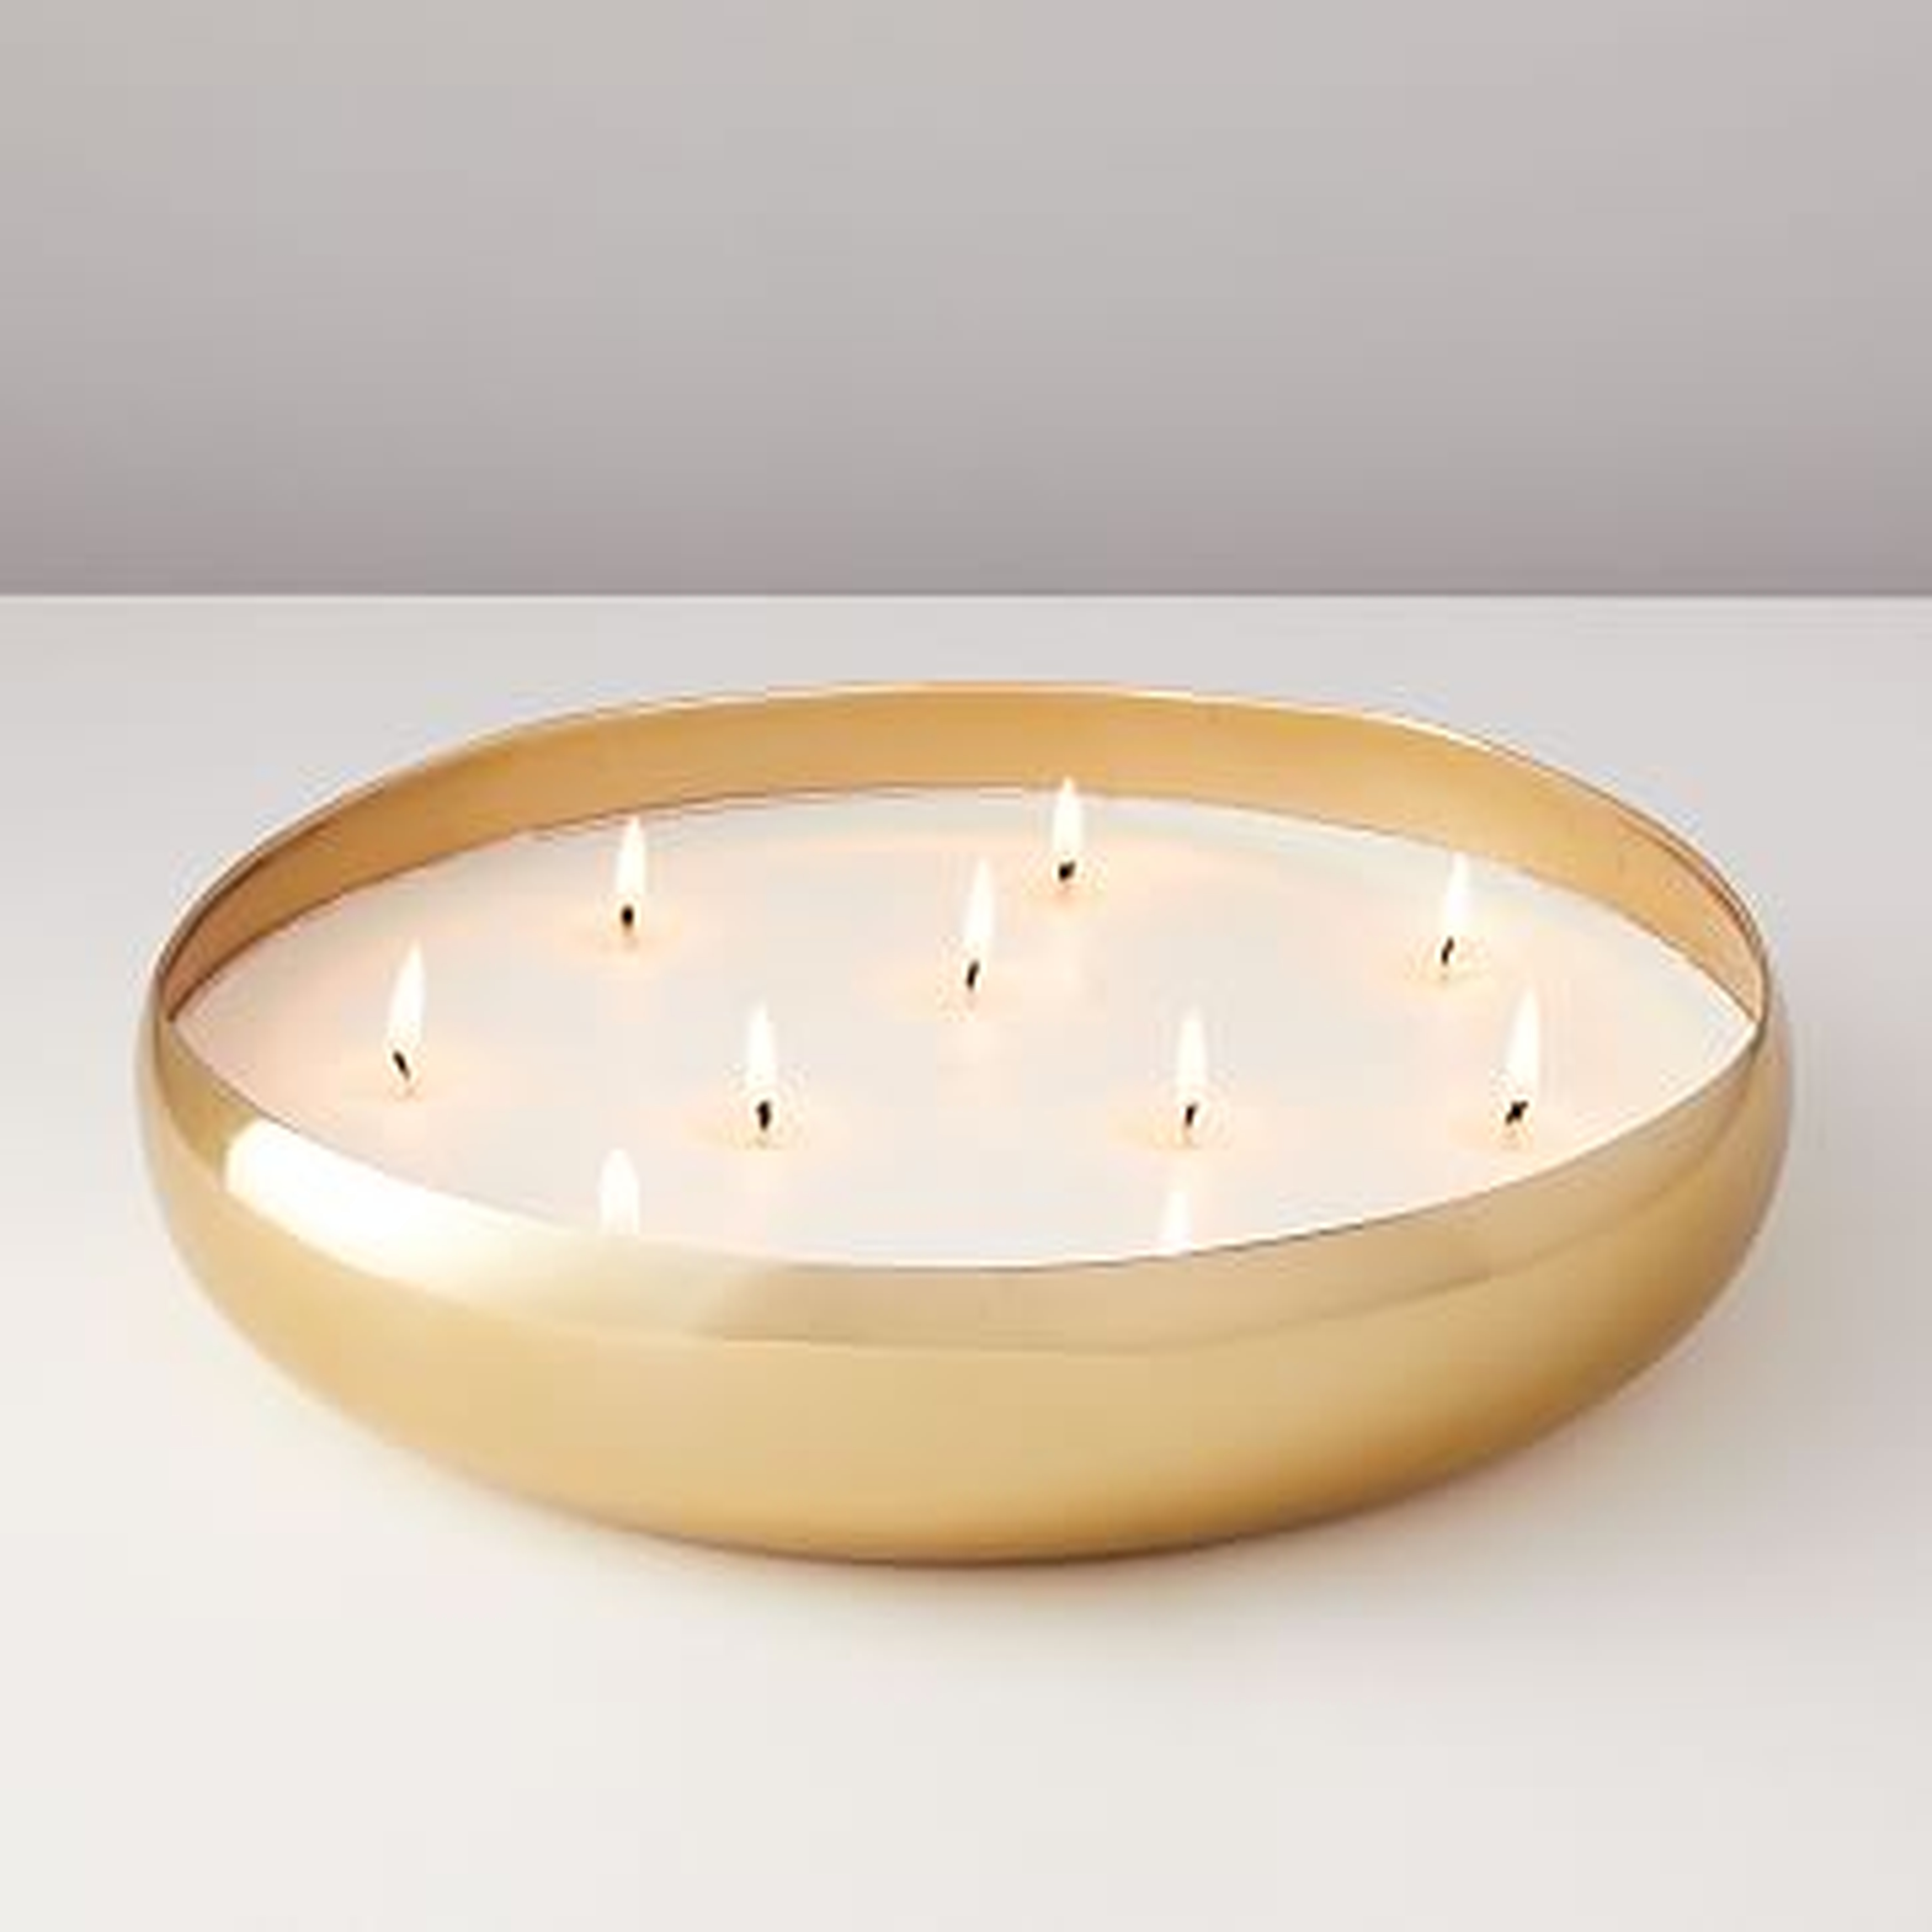 Oversized Metal Candle - West Elm